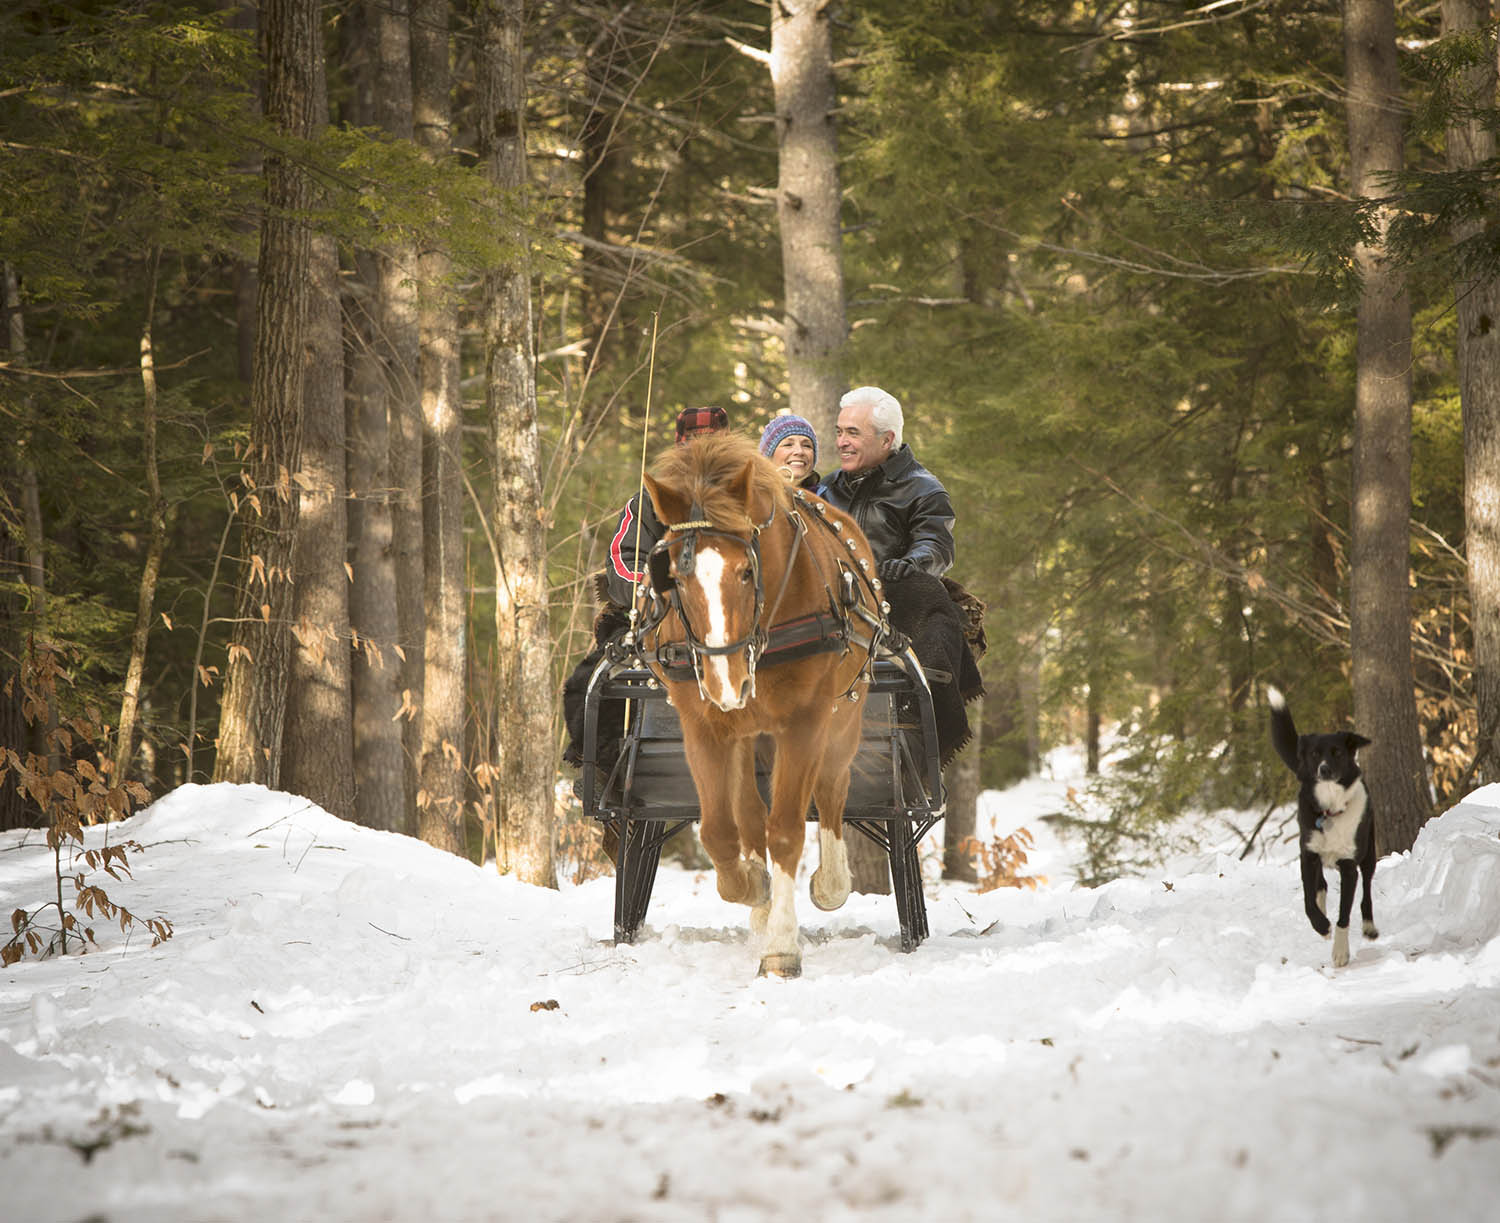 Horse drawn carriage with two people riding throught a snowy forest